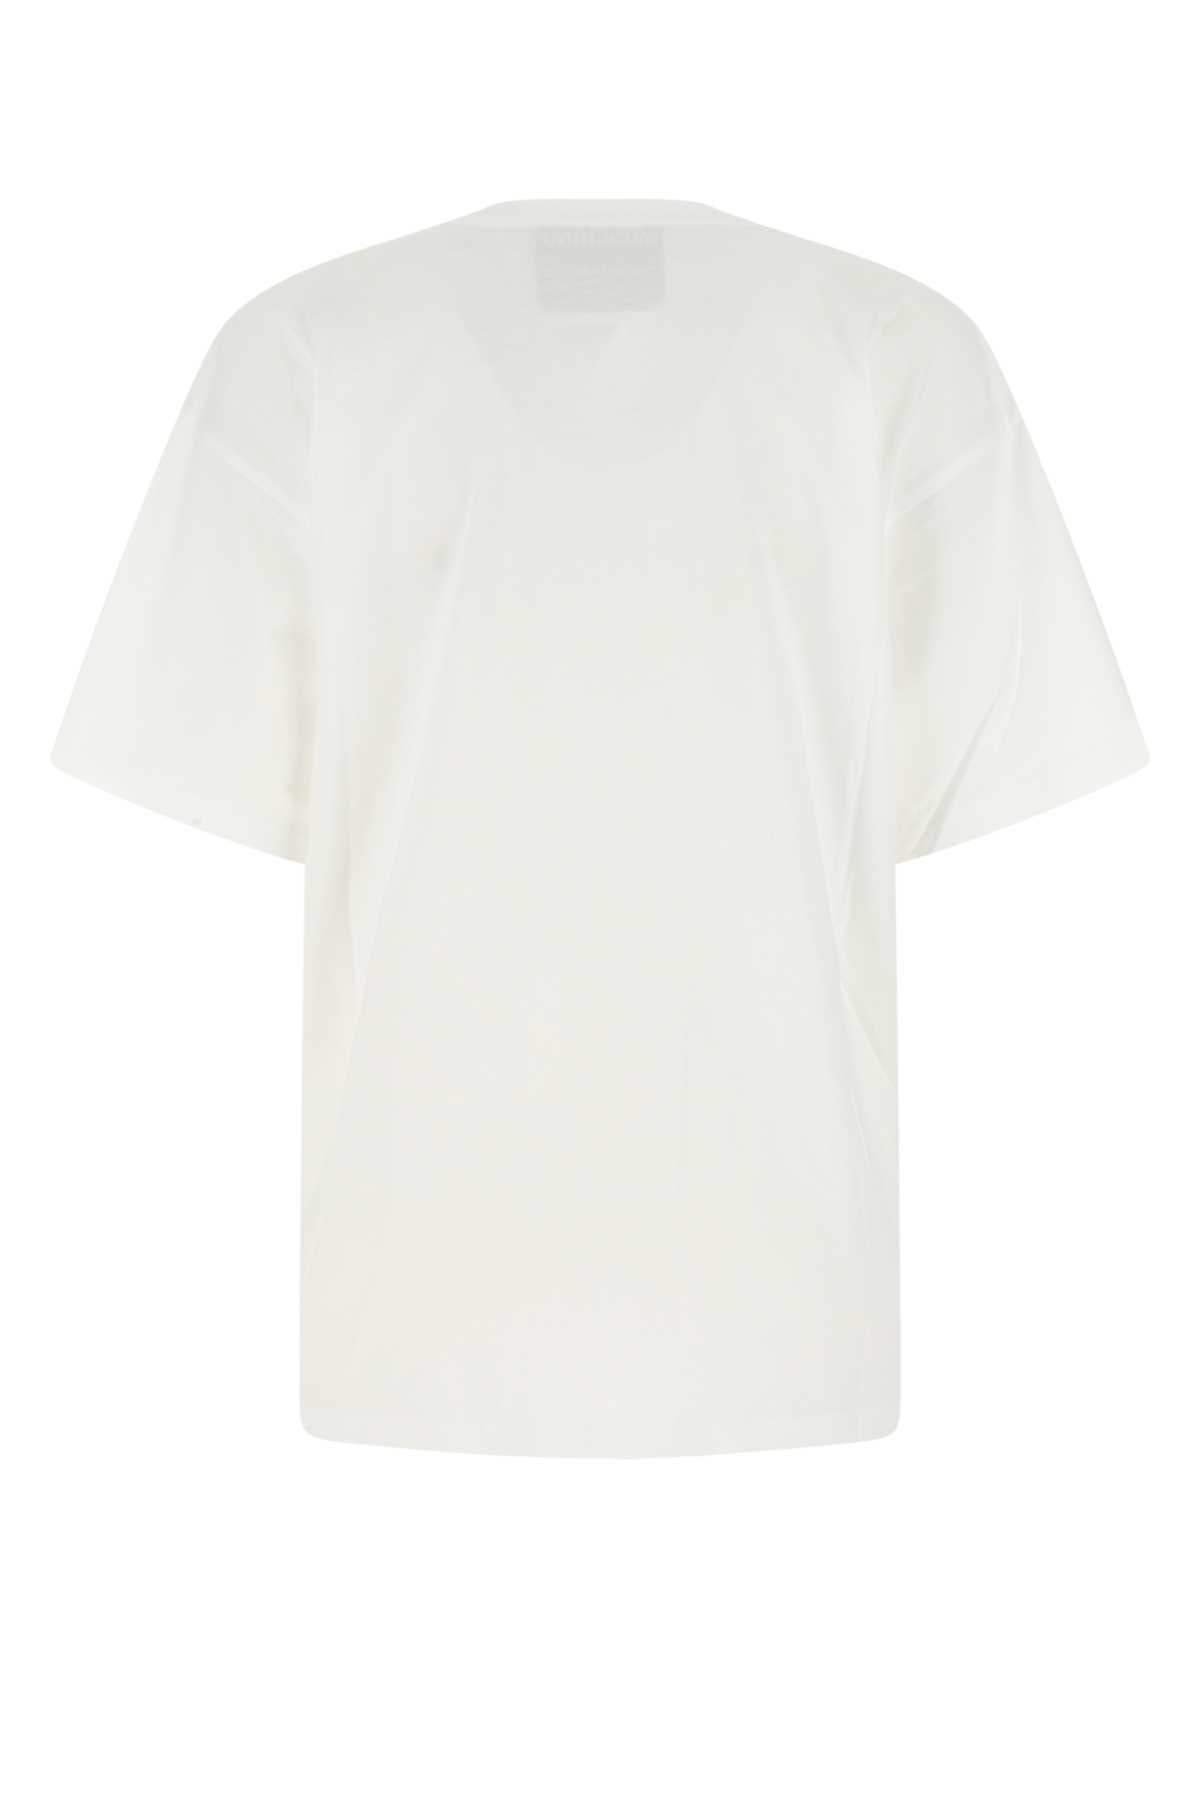 Moschino White Cotton Oversize T-shirt In A3001